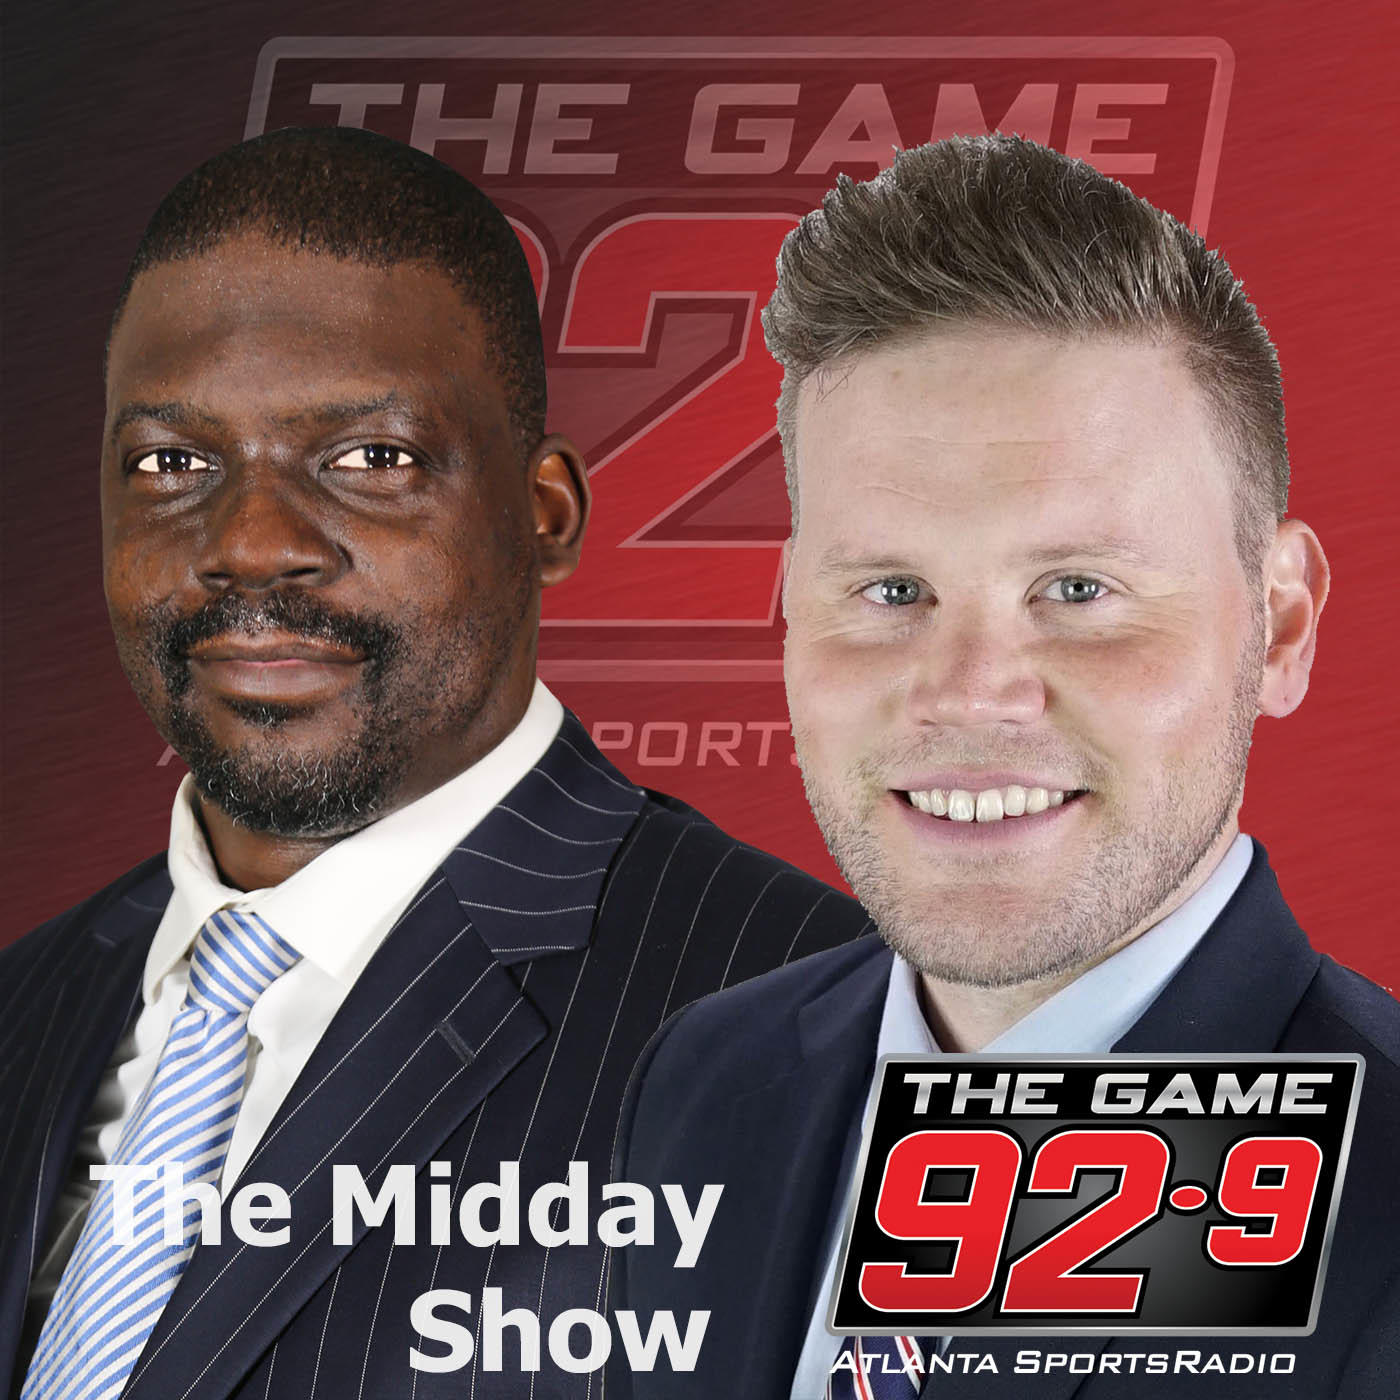 Hour 2 - Andy & Randy make their picks for NFL Awards